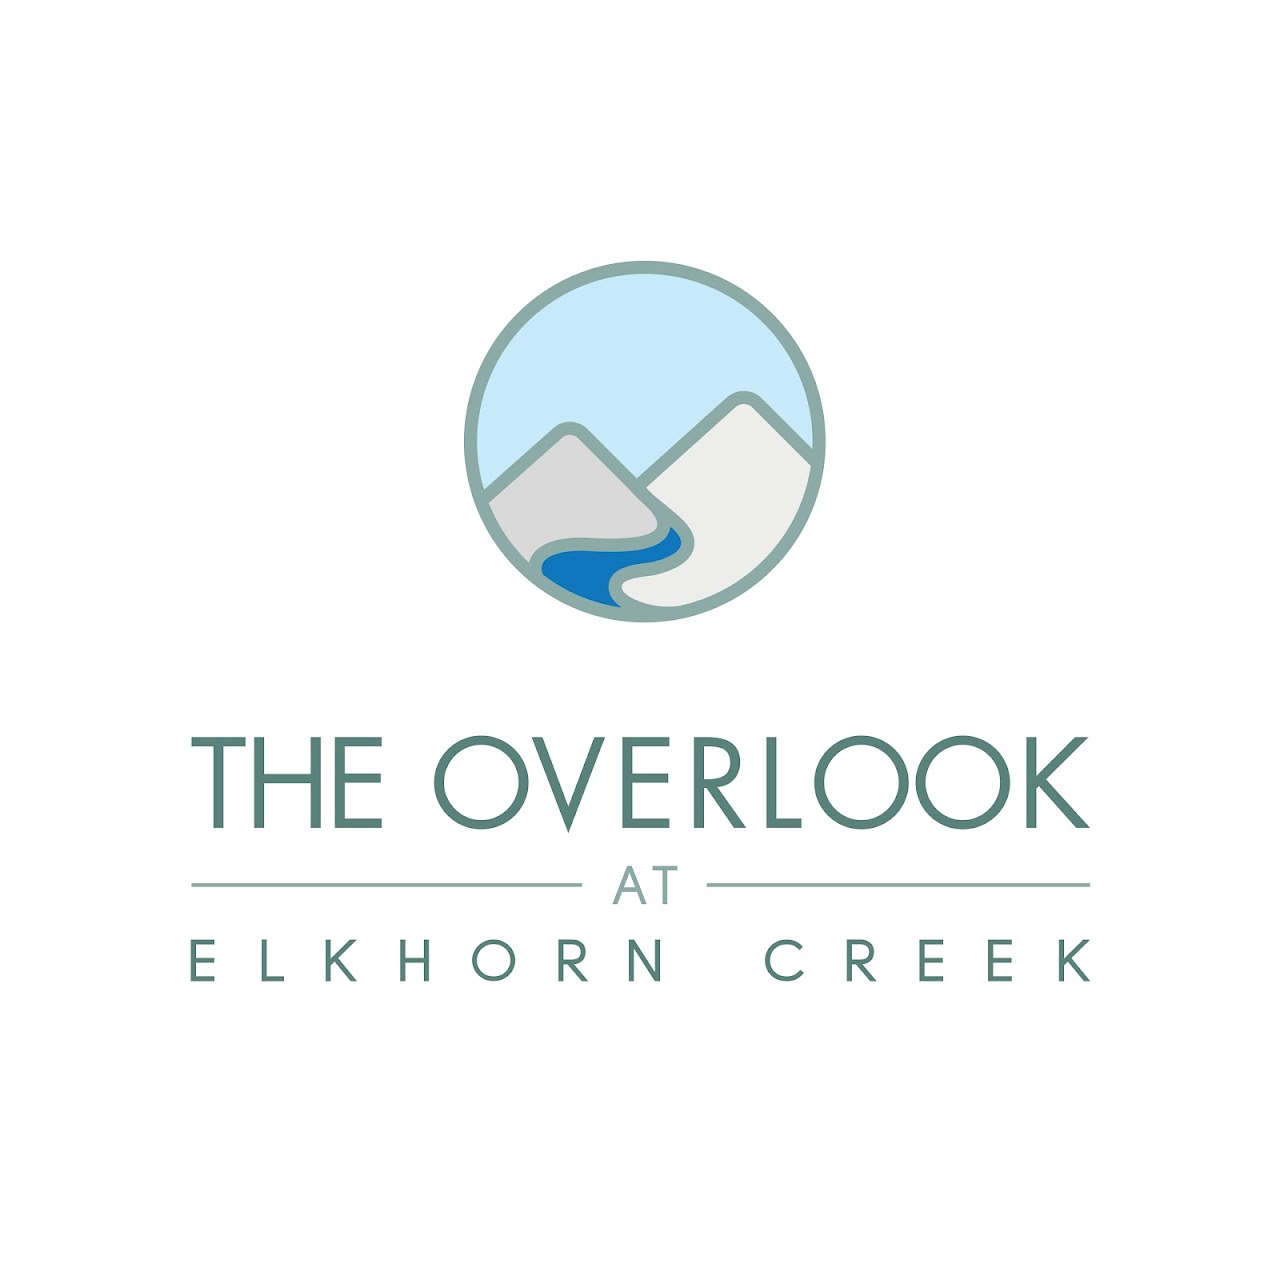 Photo of THE OVERLOOK AT ELKHORN CREEK. Affordable housing located at OVERVIEW PATH GEORGETOWN, KY 40324